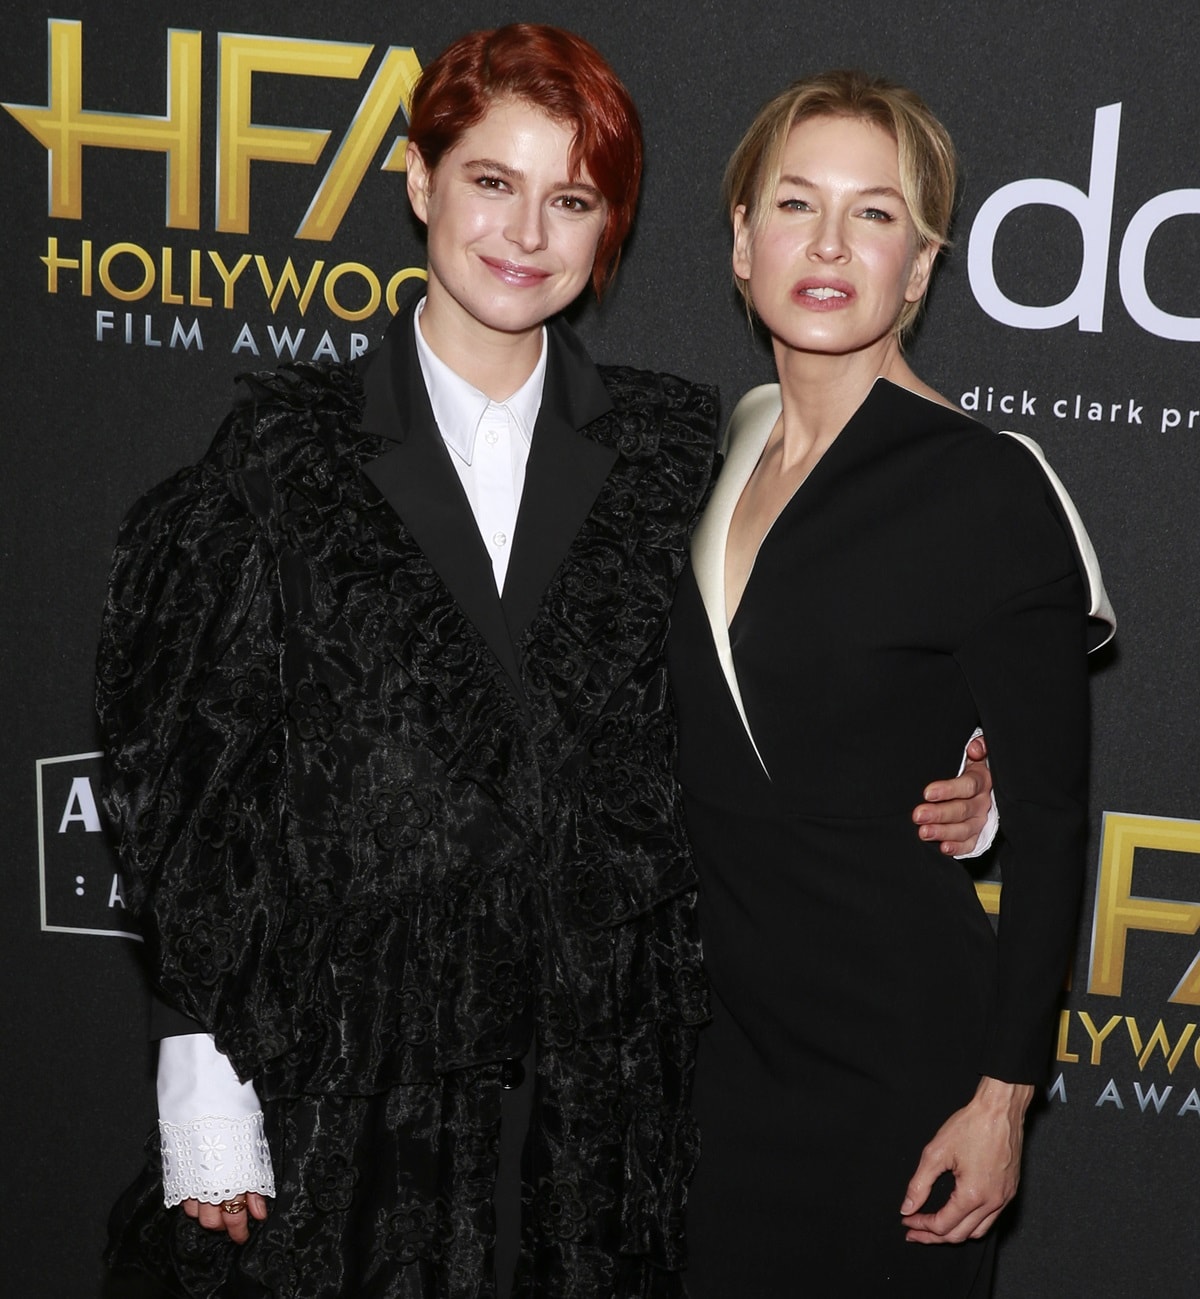 At the 23rd Annual Hollywood Film Awards held at The Beverly Hilton Hotel on November 3, 2019, in Beverly Hills, California, Jessie Buckley, standing at 5′ 7″ (1.70 m), and Renée Zellweger, with a height of 5′ 3″ (1.60 m), both graced the event